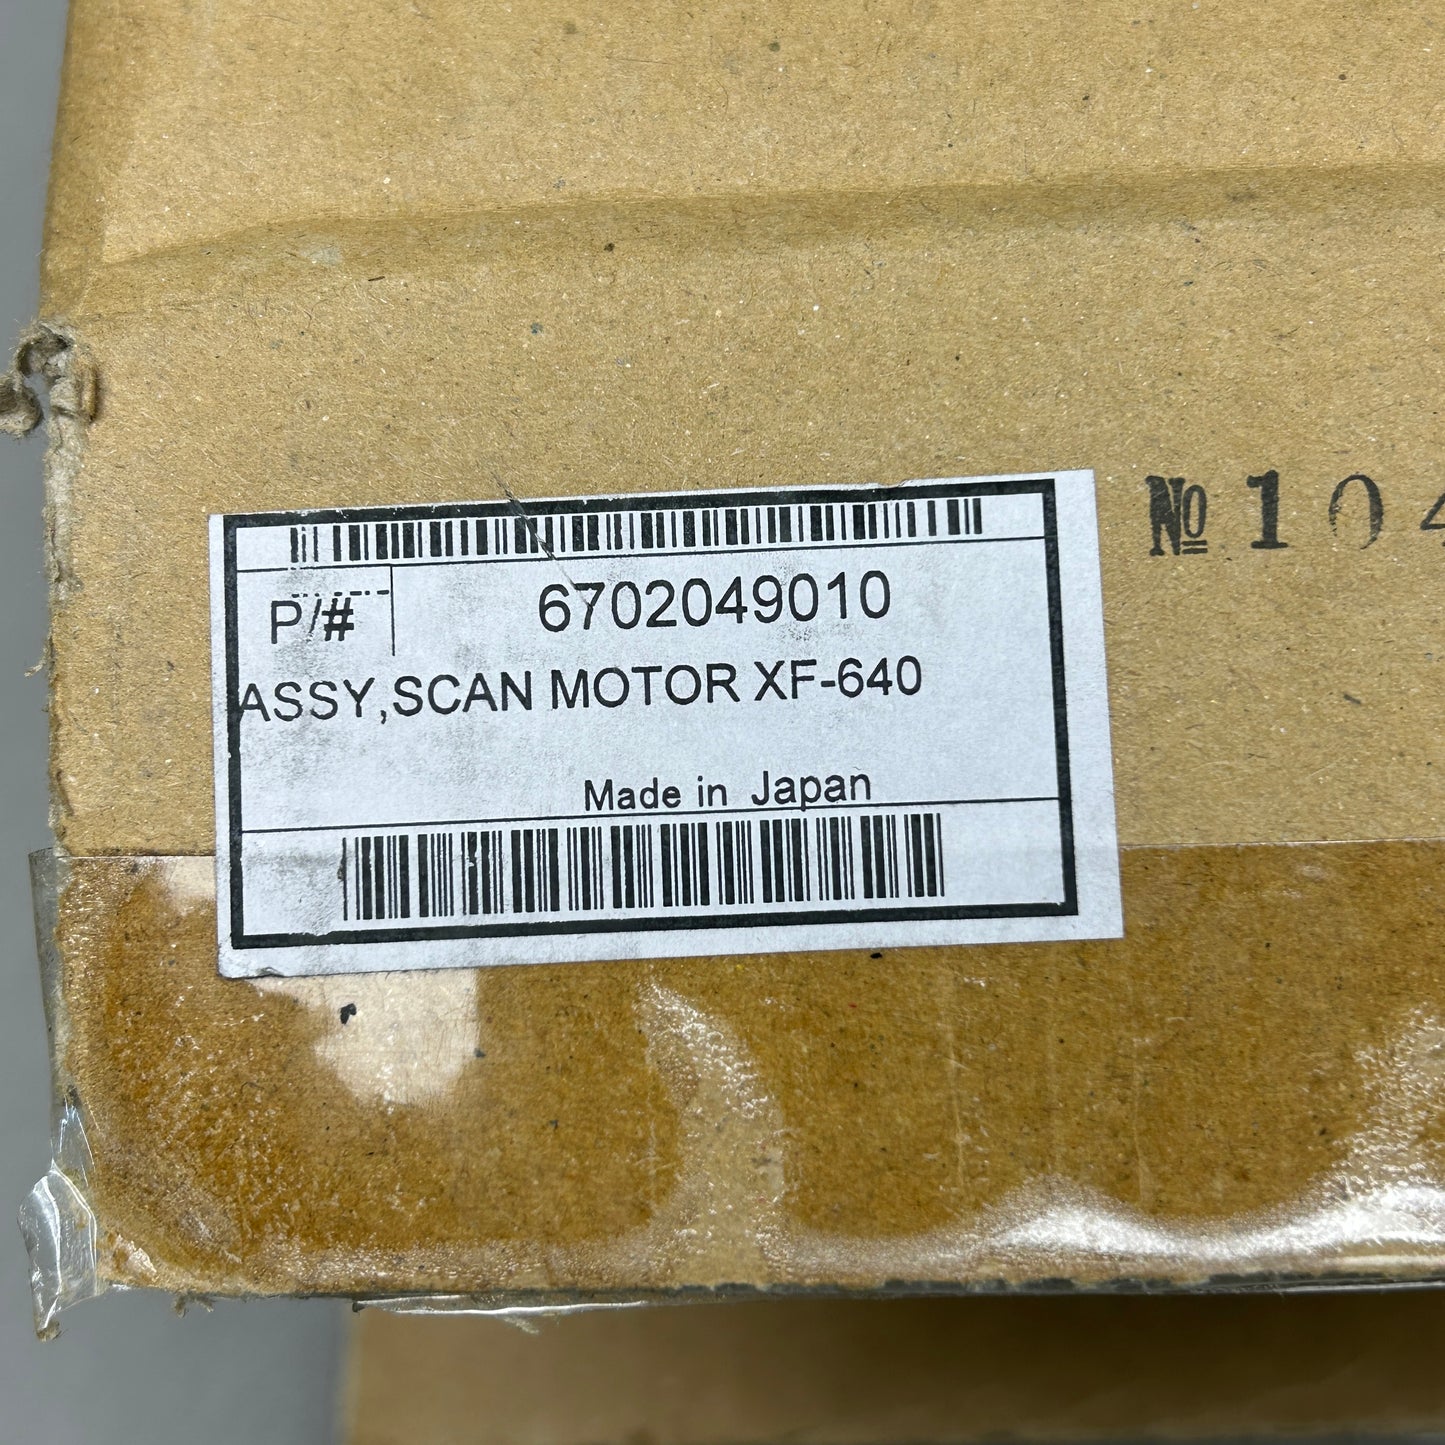 ROLAND ASSY Scan Motor XF-640 6702049010 (New)